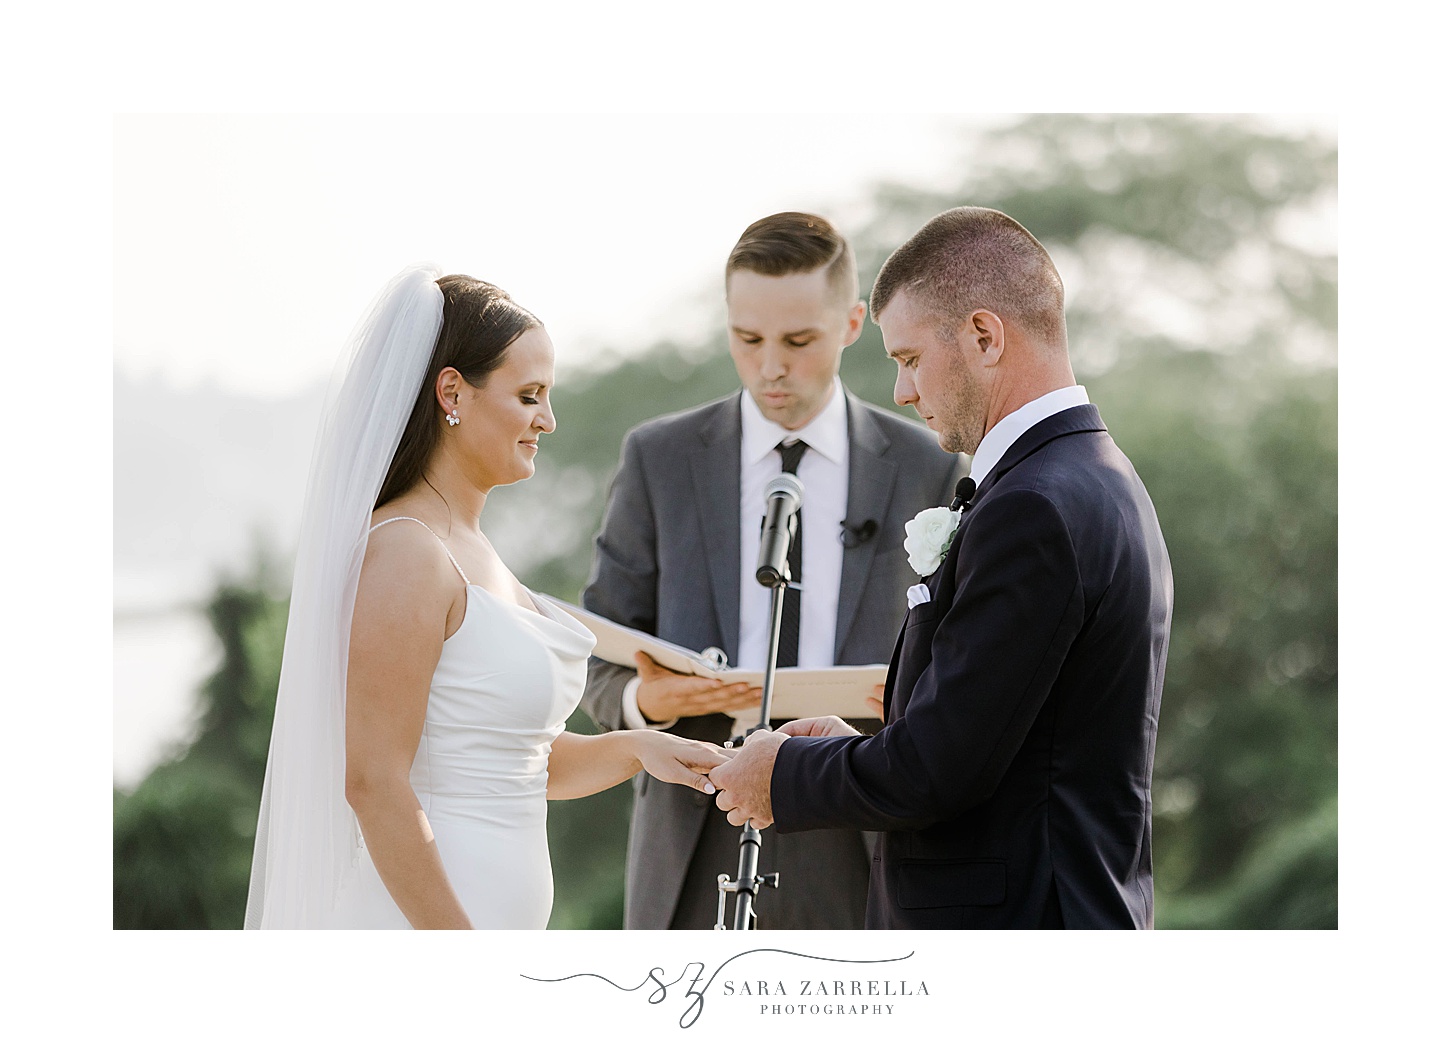 groom puts ring on bride's hand during ceremony at the Wyndham Newport Hotel